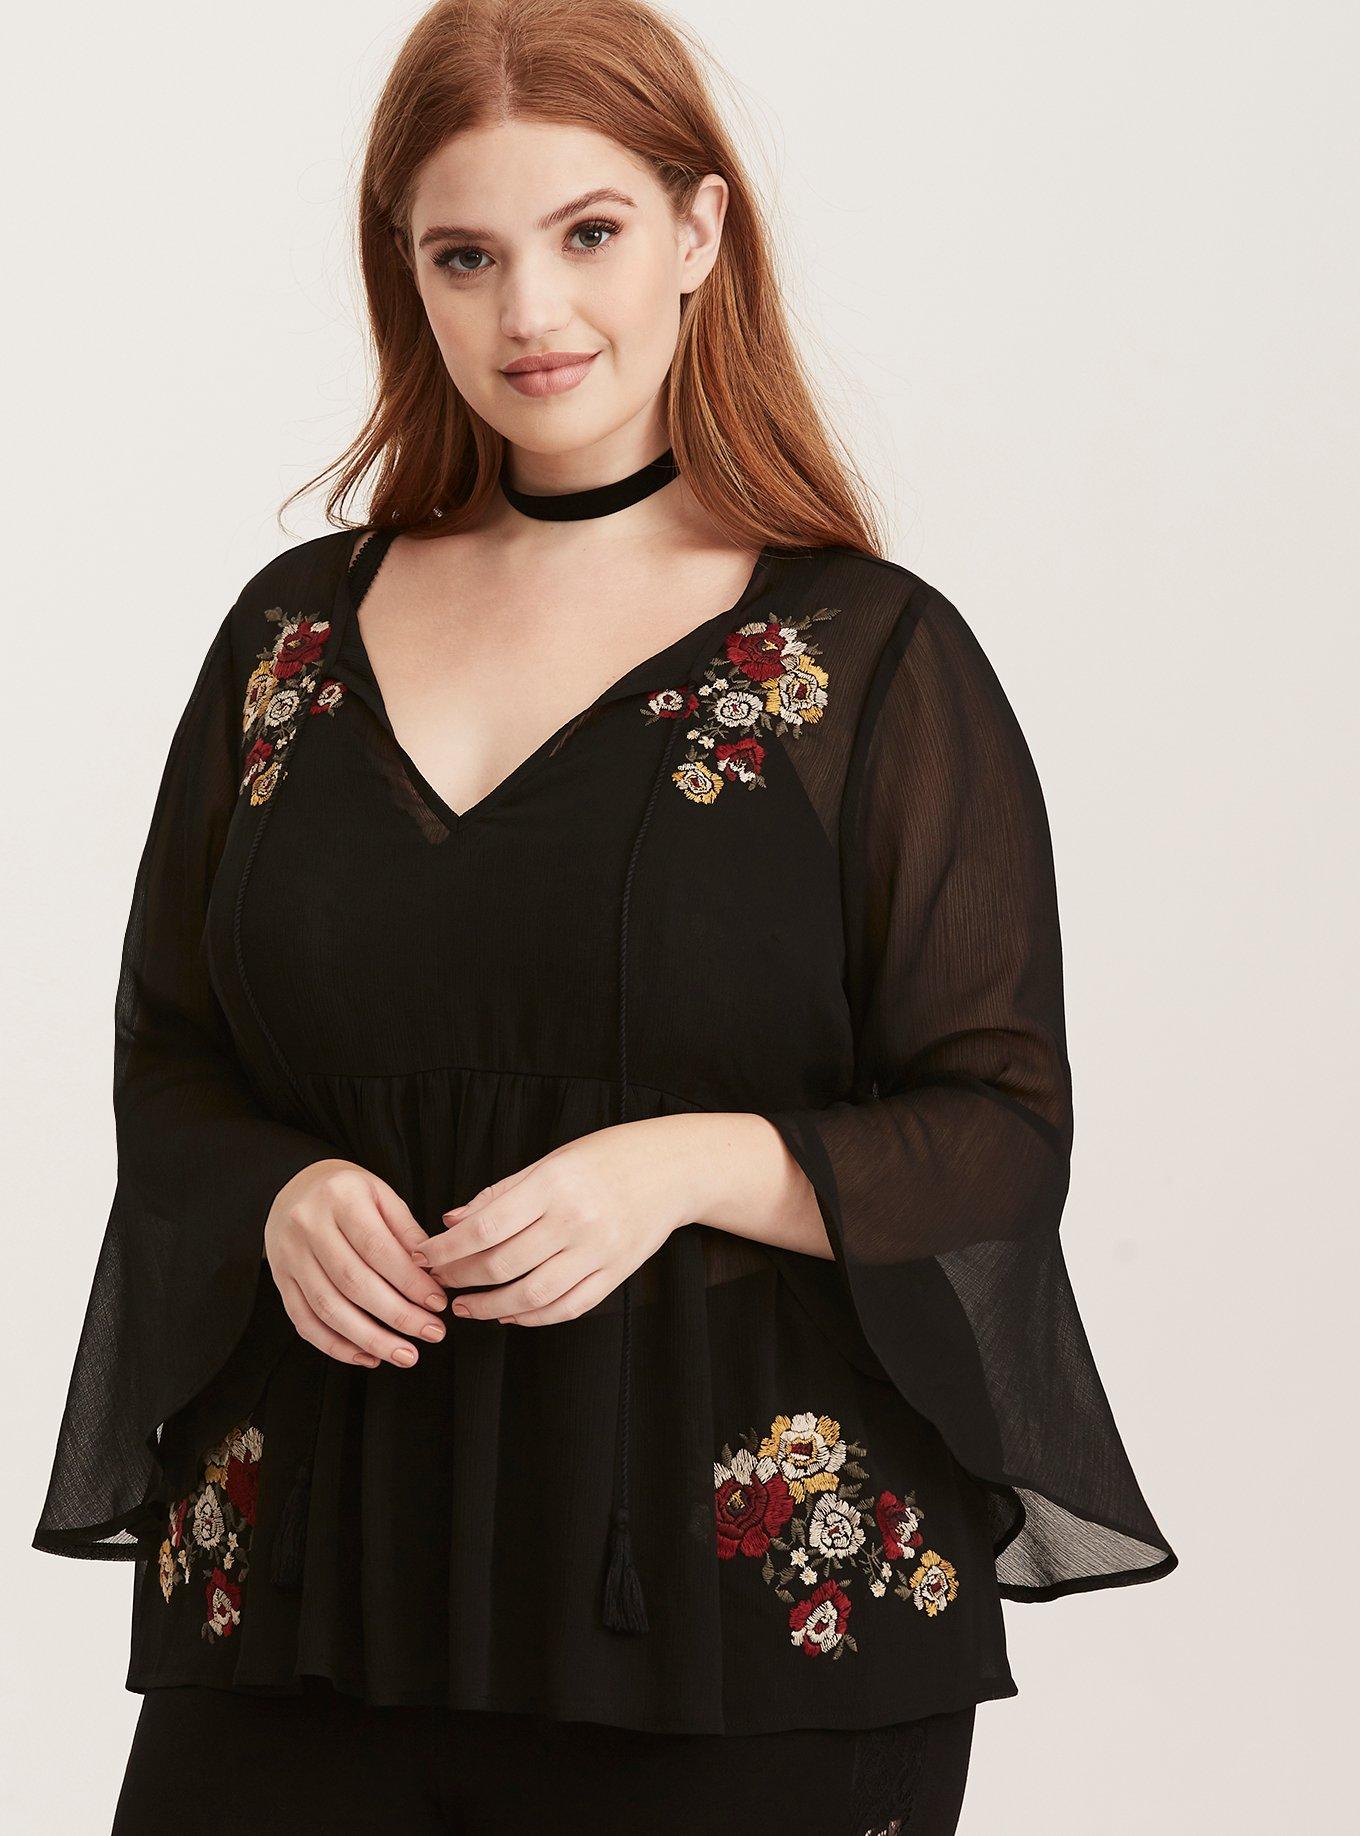 Plus Size - Embroidered Chiffon Bell Sleeve Blouse - Torrid